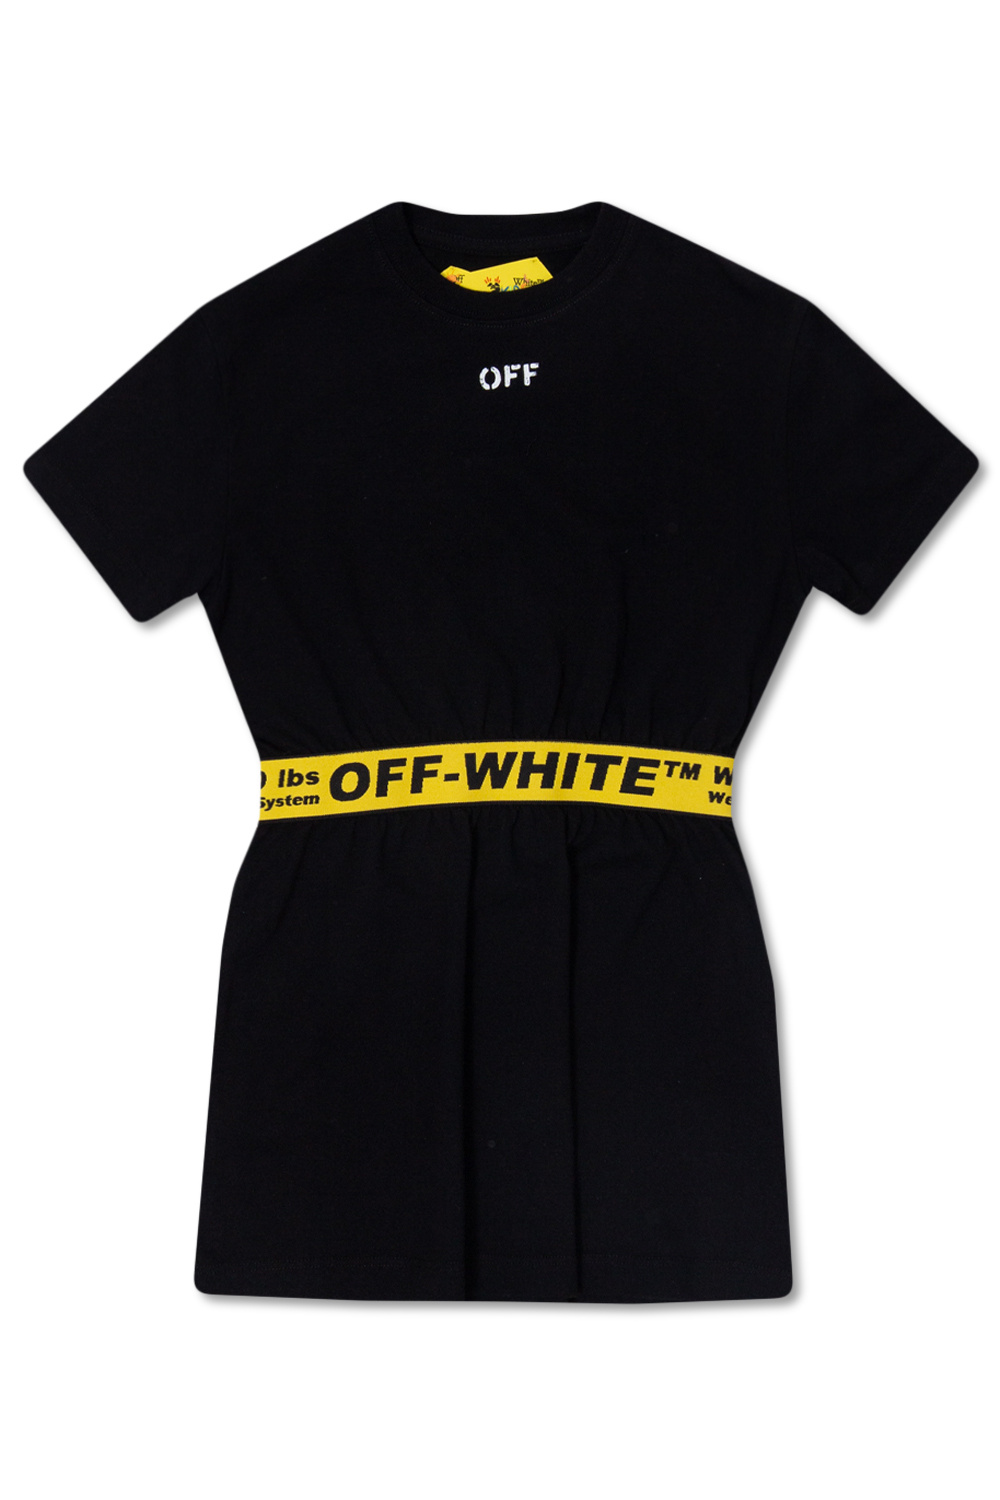 Off-White Kids Head outside and back into your habits wearing the ® Back In Hybrid Rights